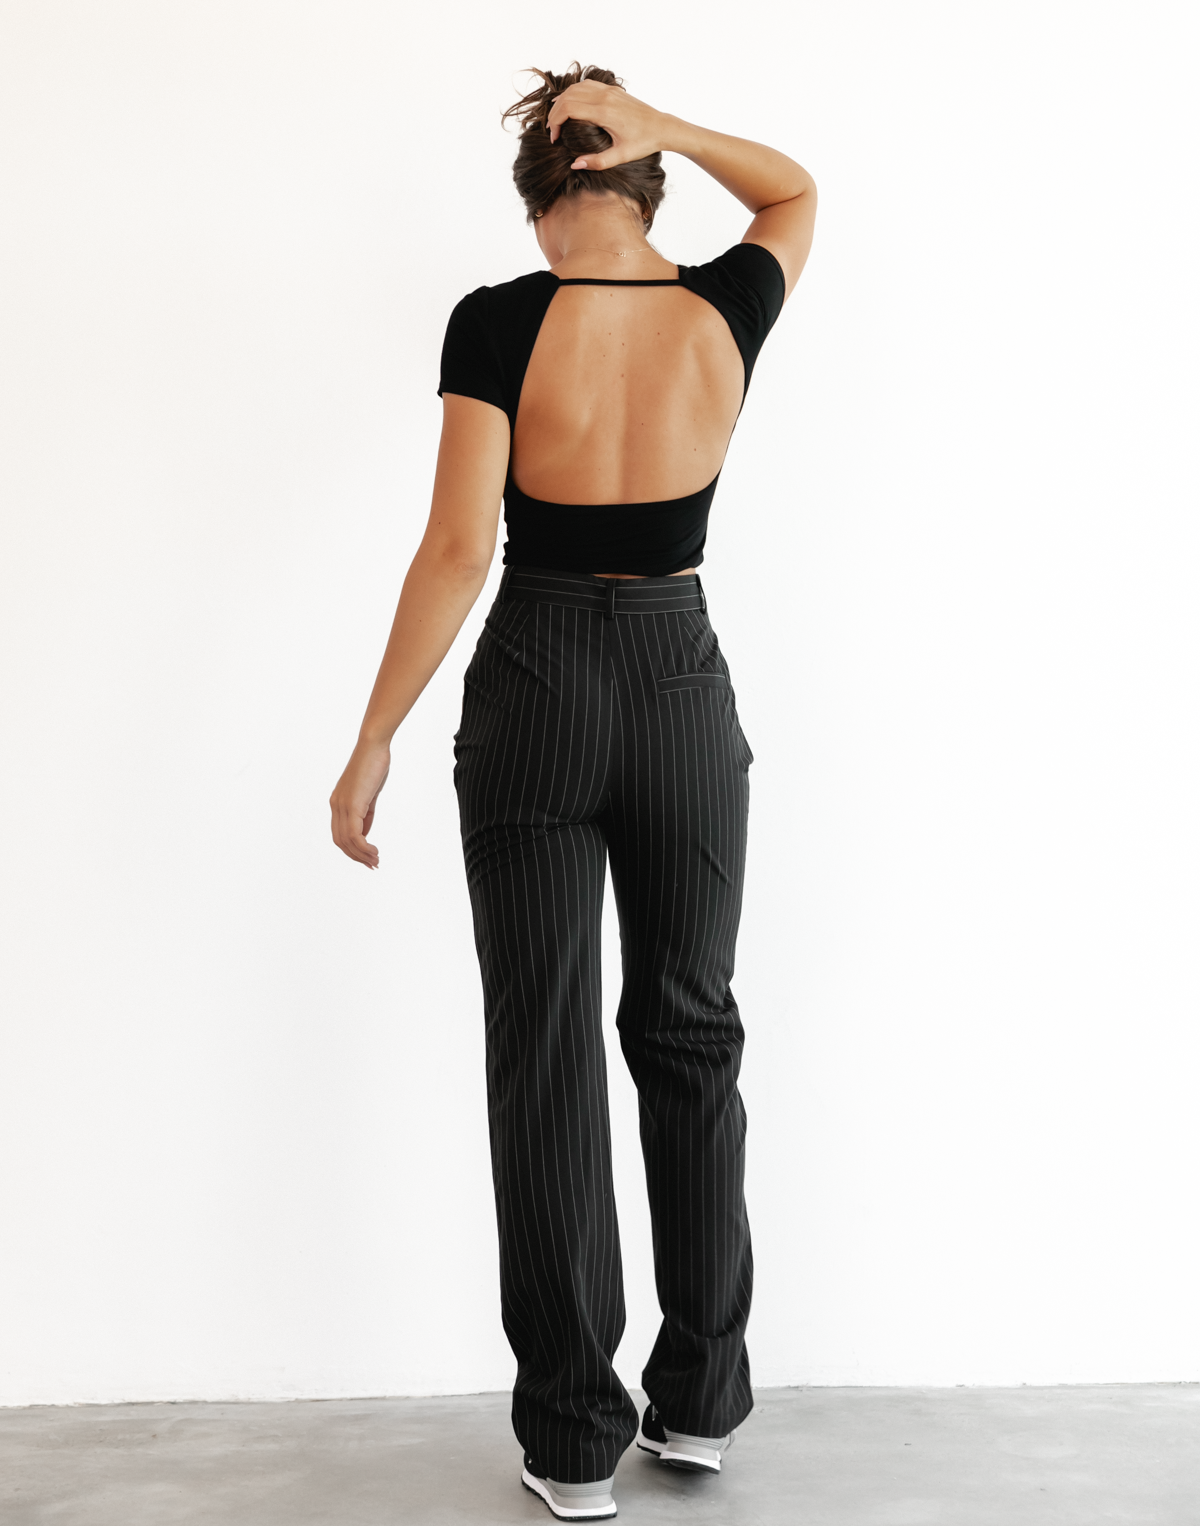 Alter Ego Pants - Black Pinstripe High Waisted Pants - Women's Pants - Charcoal Clothing